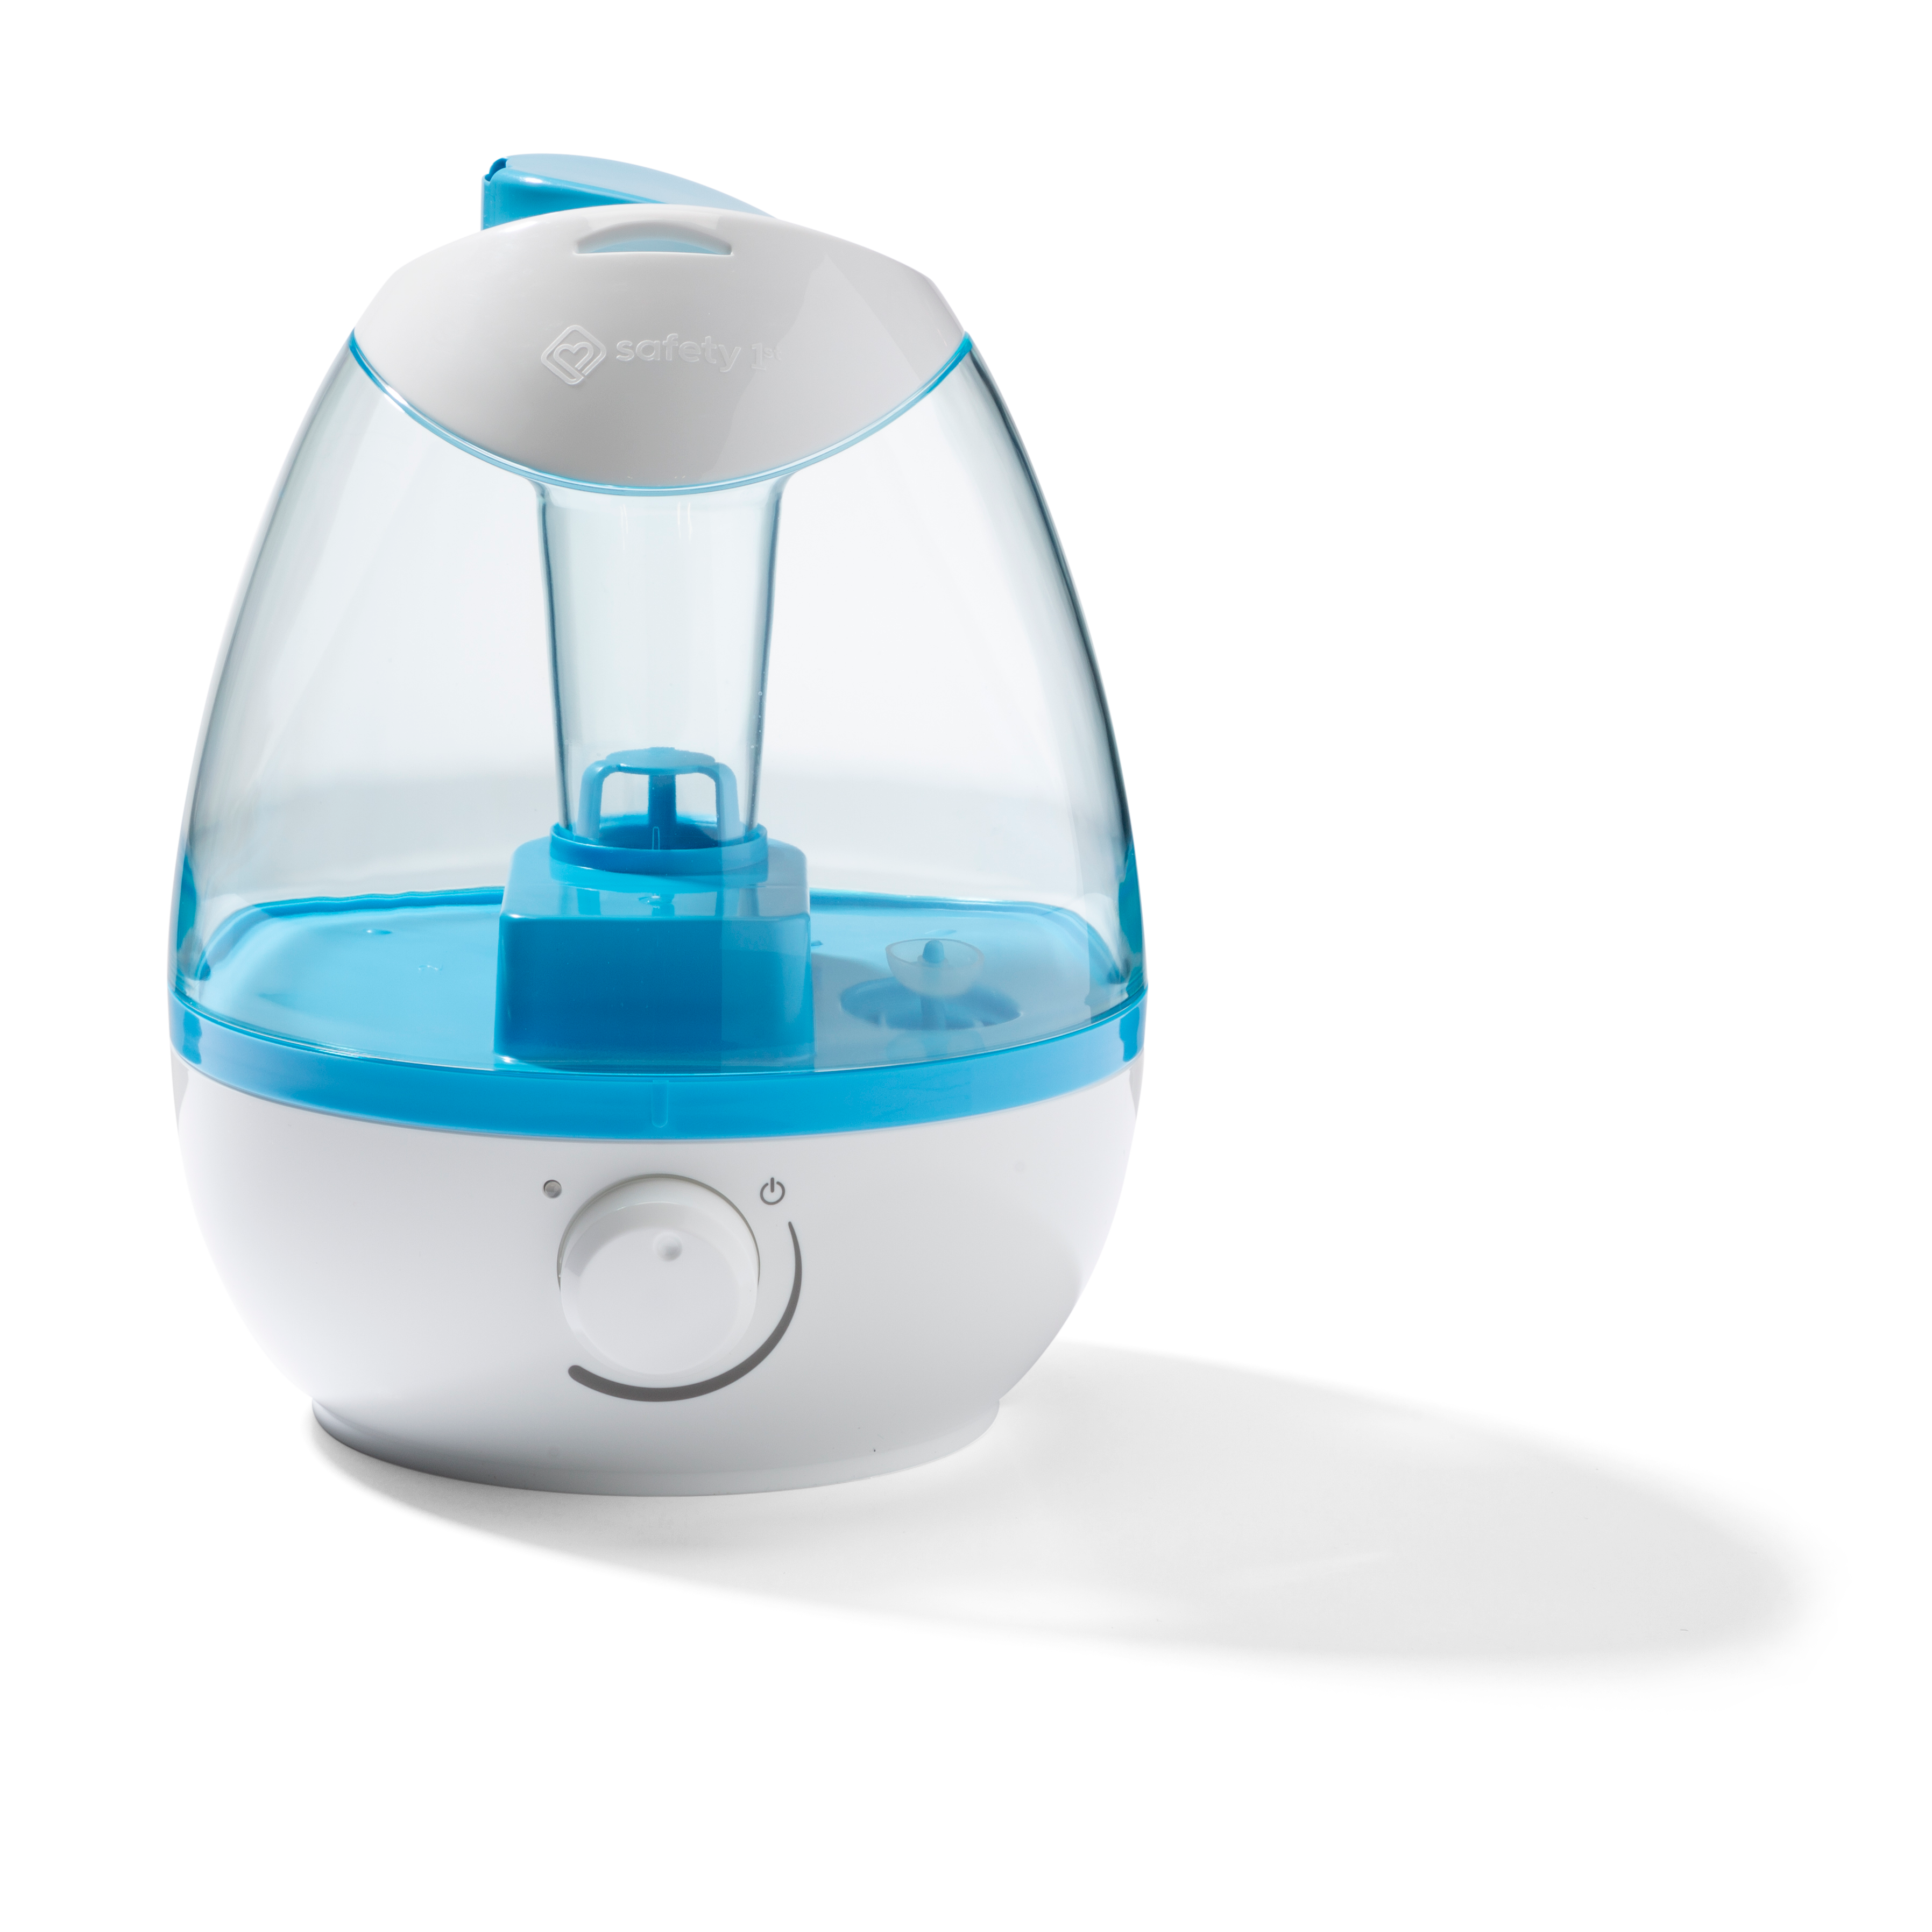 Filter Free Cool Mist Humidifier - Blue